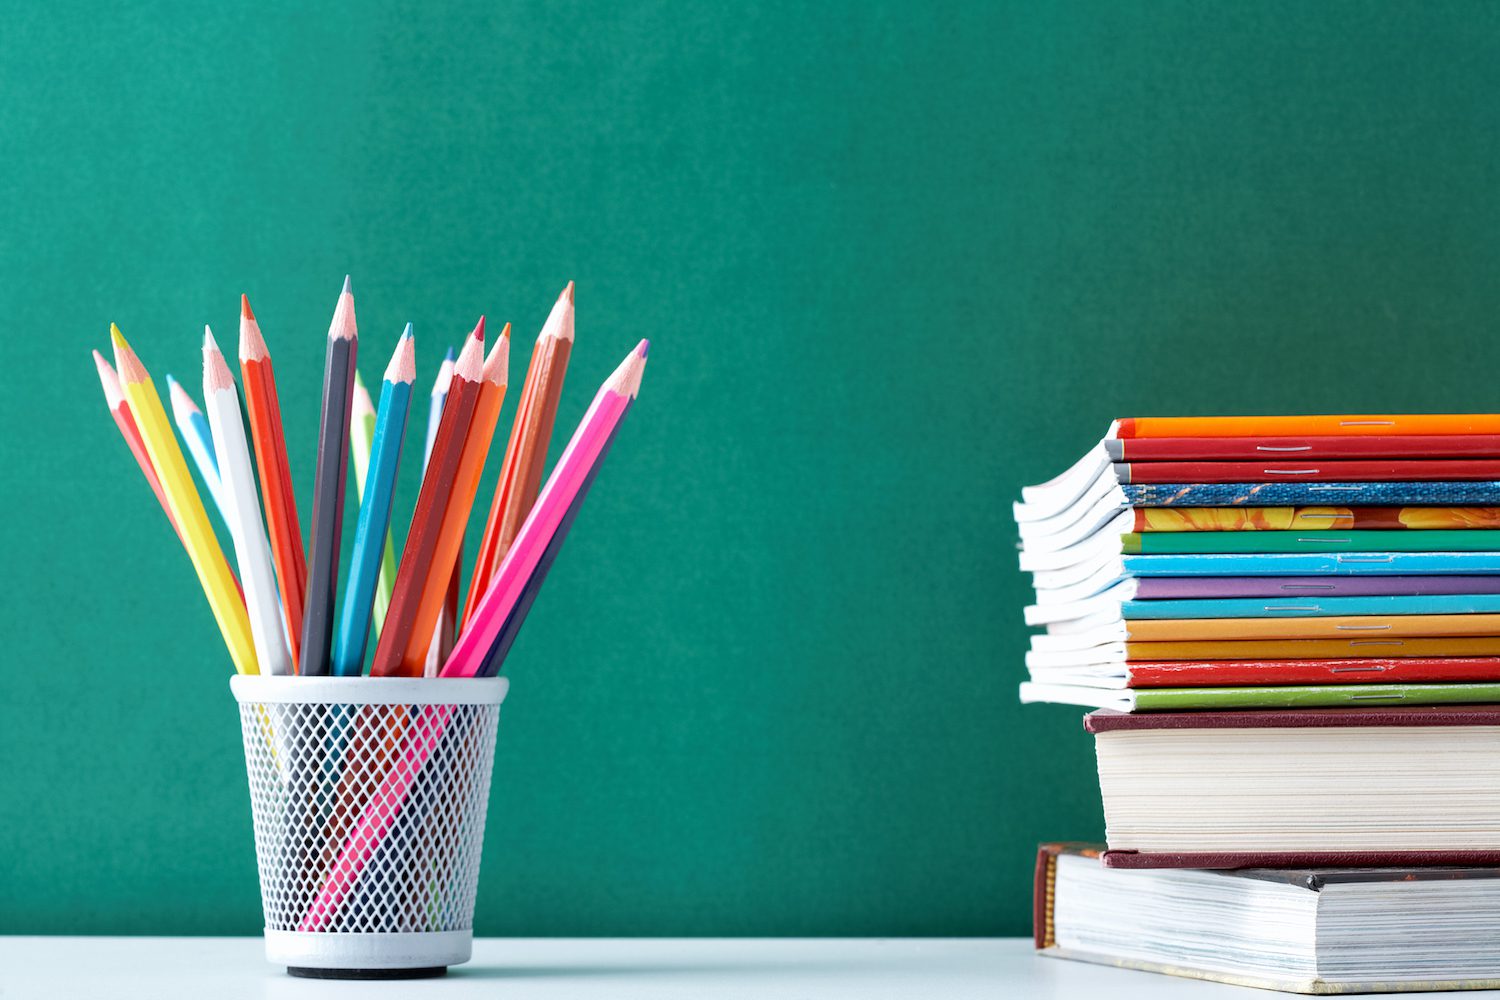 Image of colored pencils in a cup and a stack of books against a green chalkboard.